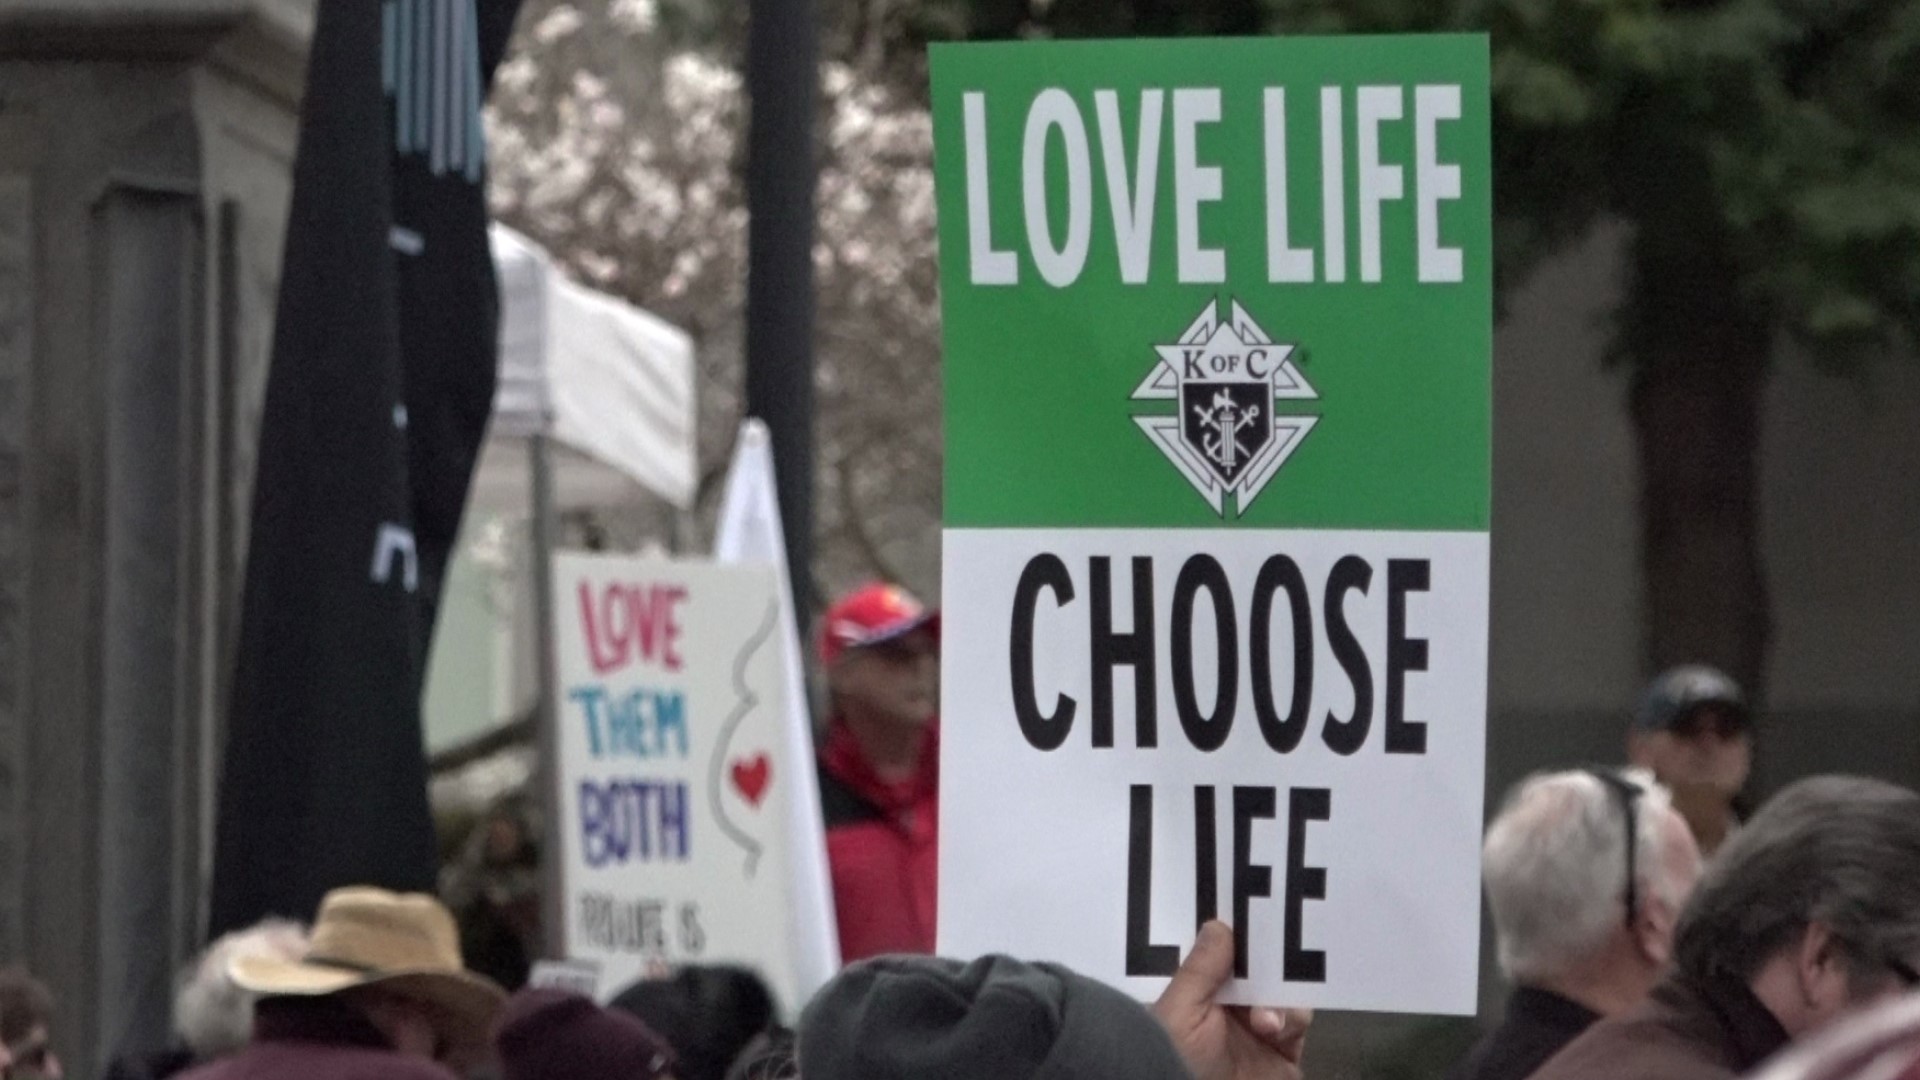 The March for Life is an annual anti-abortion rally and march against the practice of legal abortions, organized by the California Family Council.